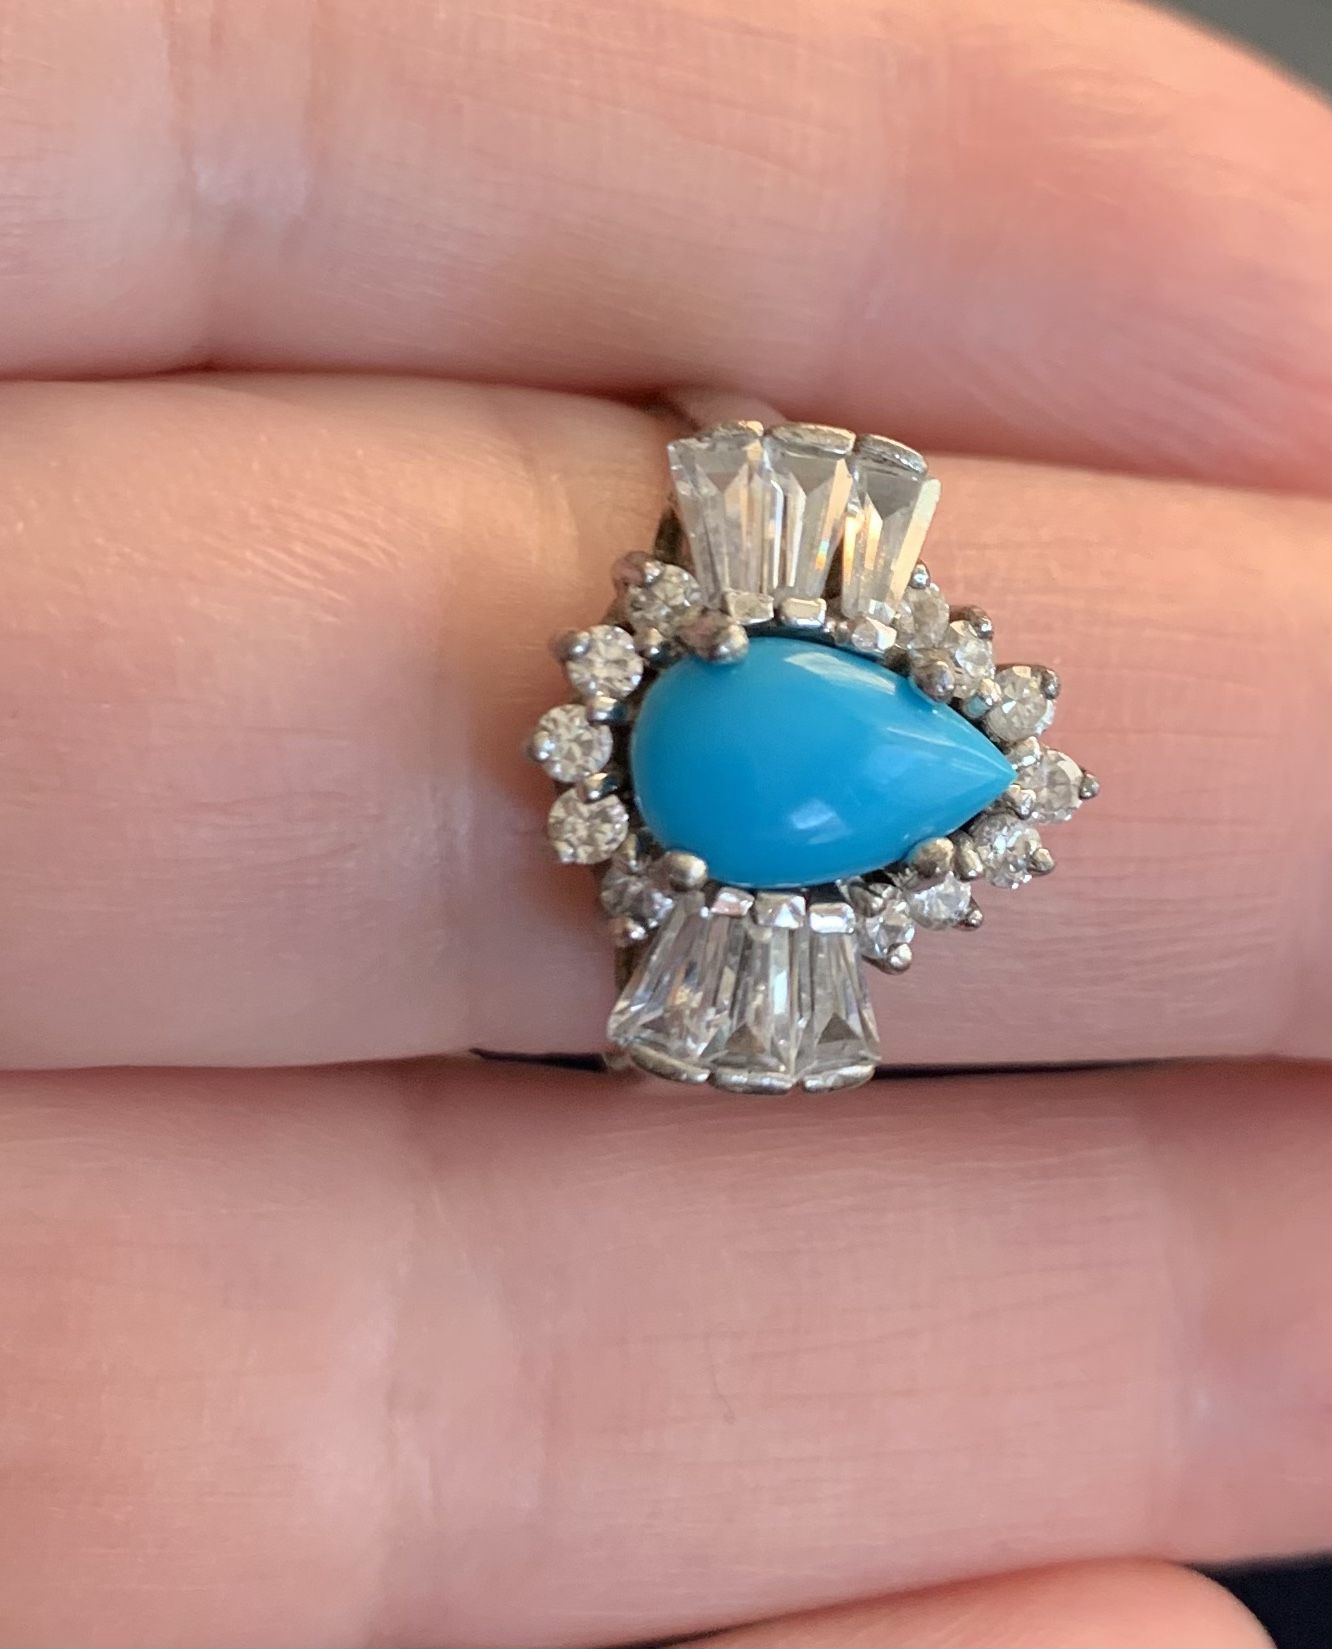 Beautiful 925 Silver Ring with Turquoise and cubic Zirconia Size 8 price $55